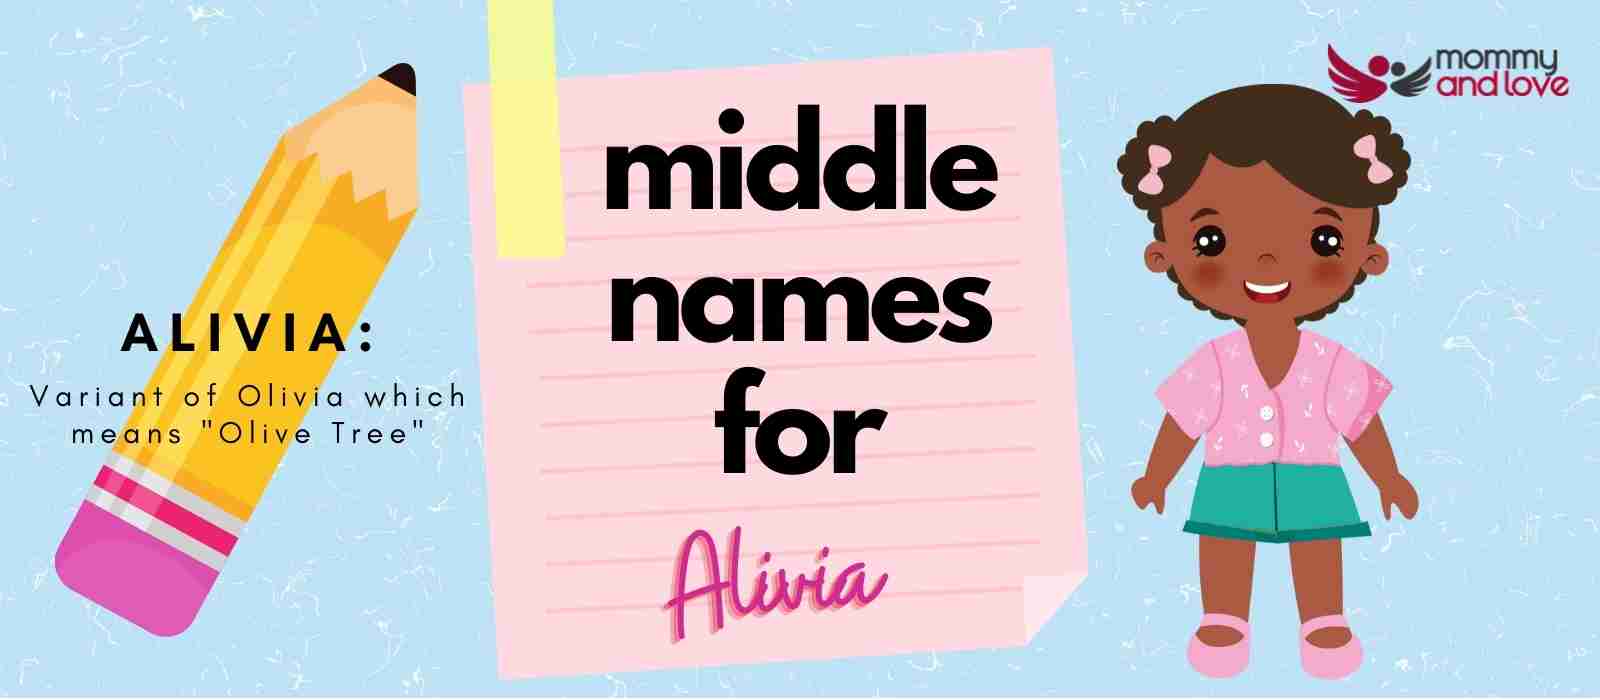 Middle Names for Alivia